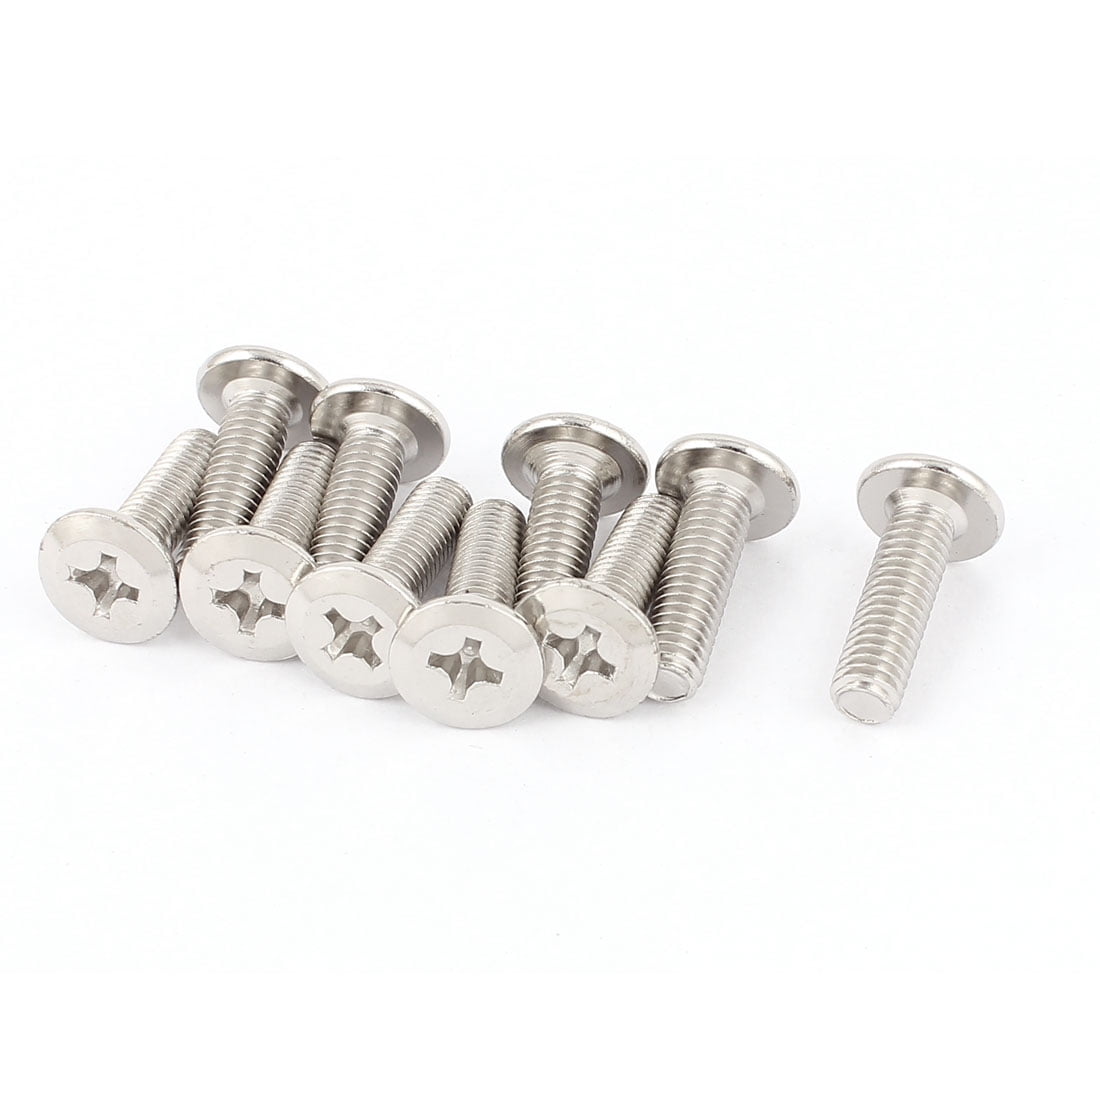 Uxcell M6 X 20mm 1mm Pitch Phillips Flat Head Countersunk Bolts Screws 10 Pcs for sale online 